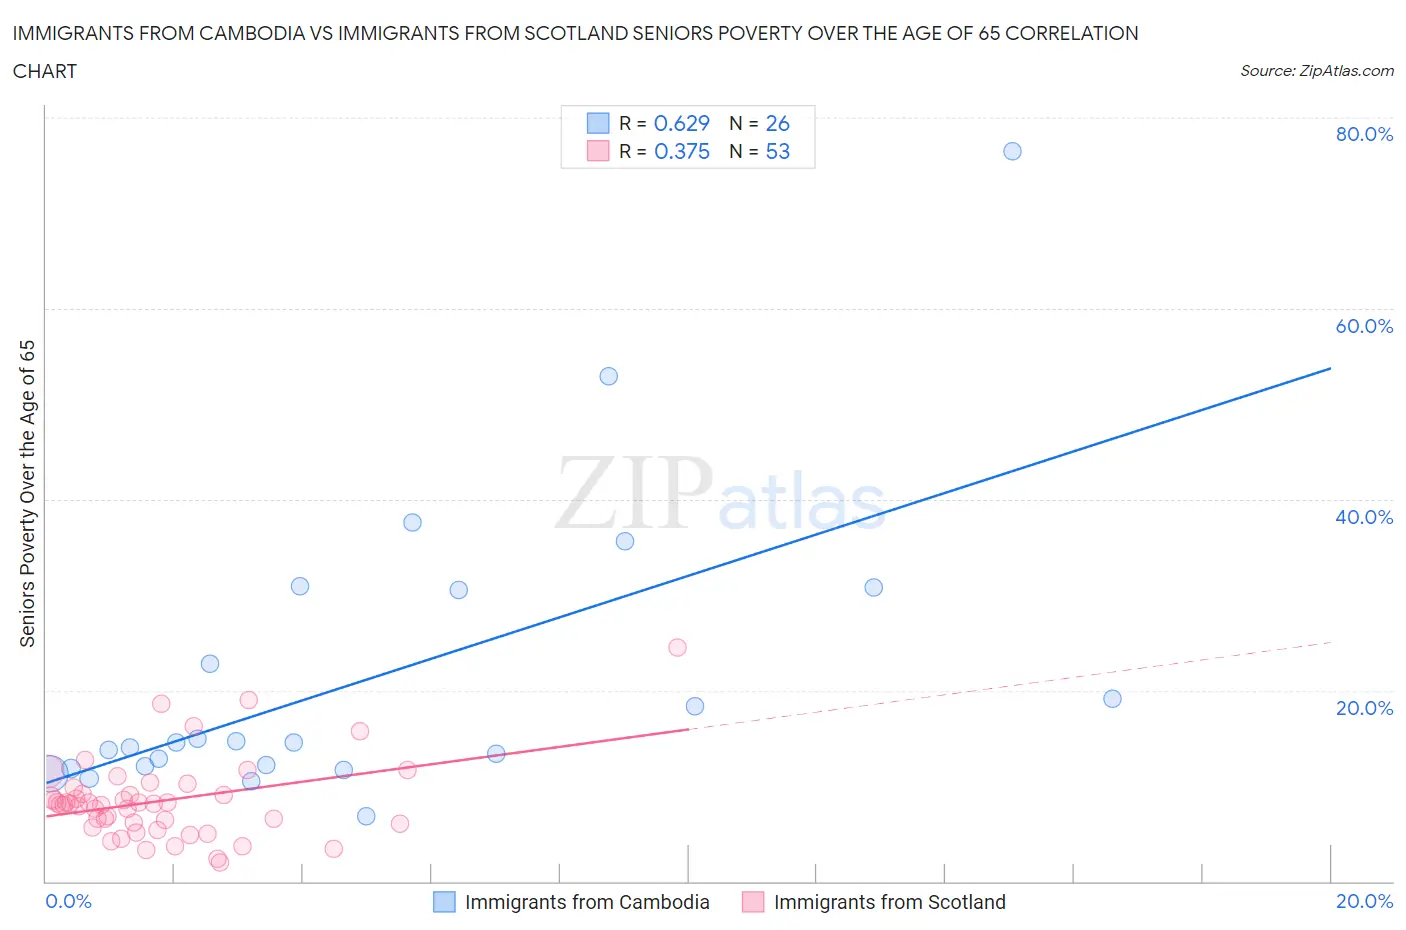 Immigrants from Cambodia vs Immigrants from Scotland Seniors Poverty Over the Age of 65